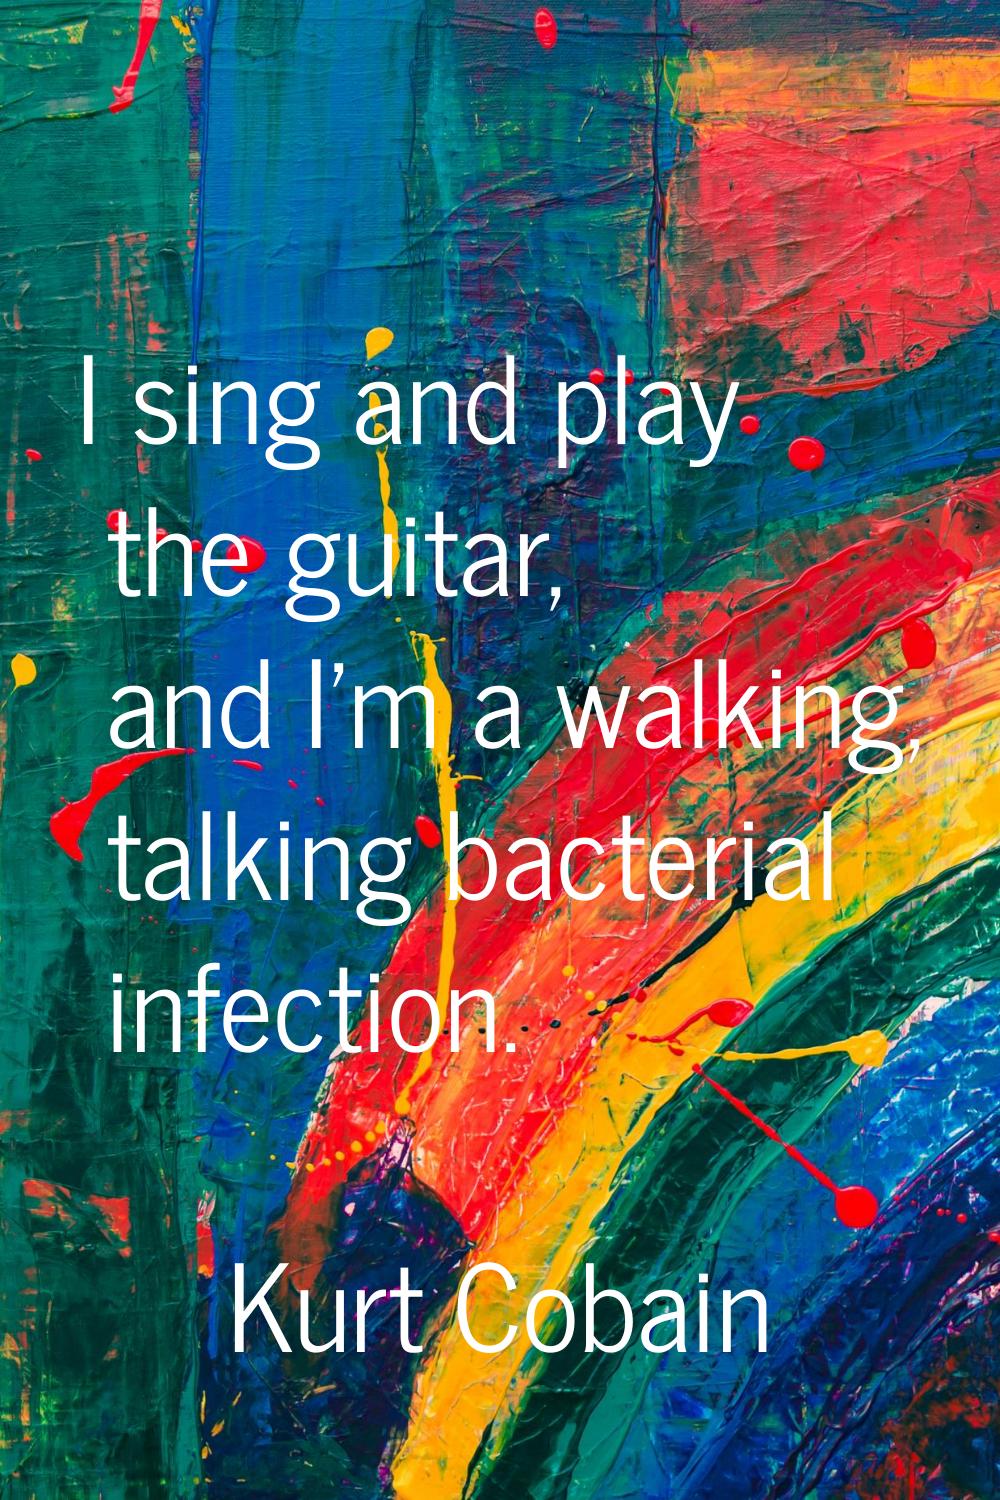 I sing and play the guitar, and I'm a walking, talking bacterial infection.